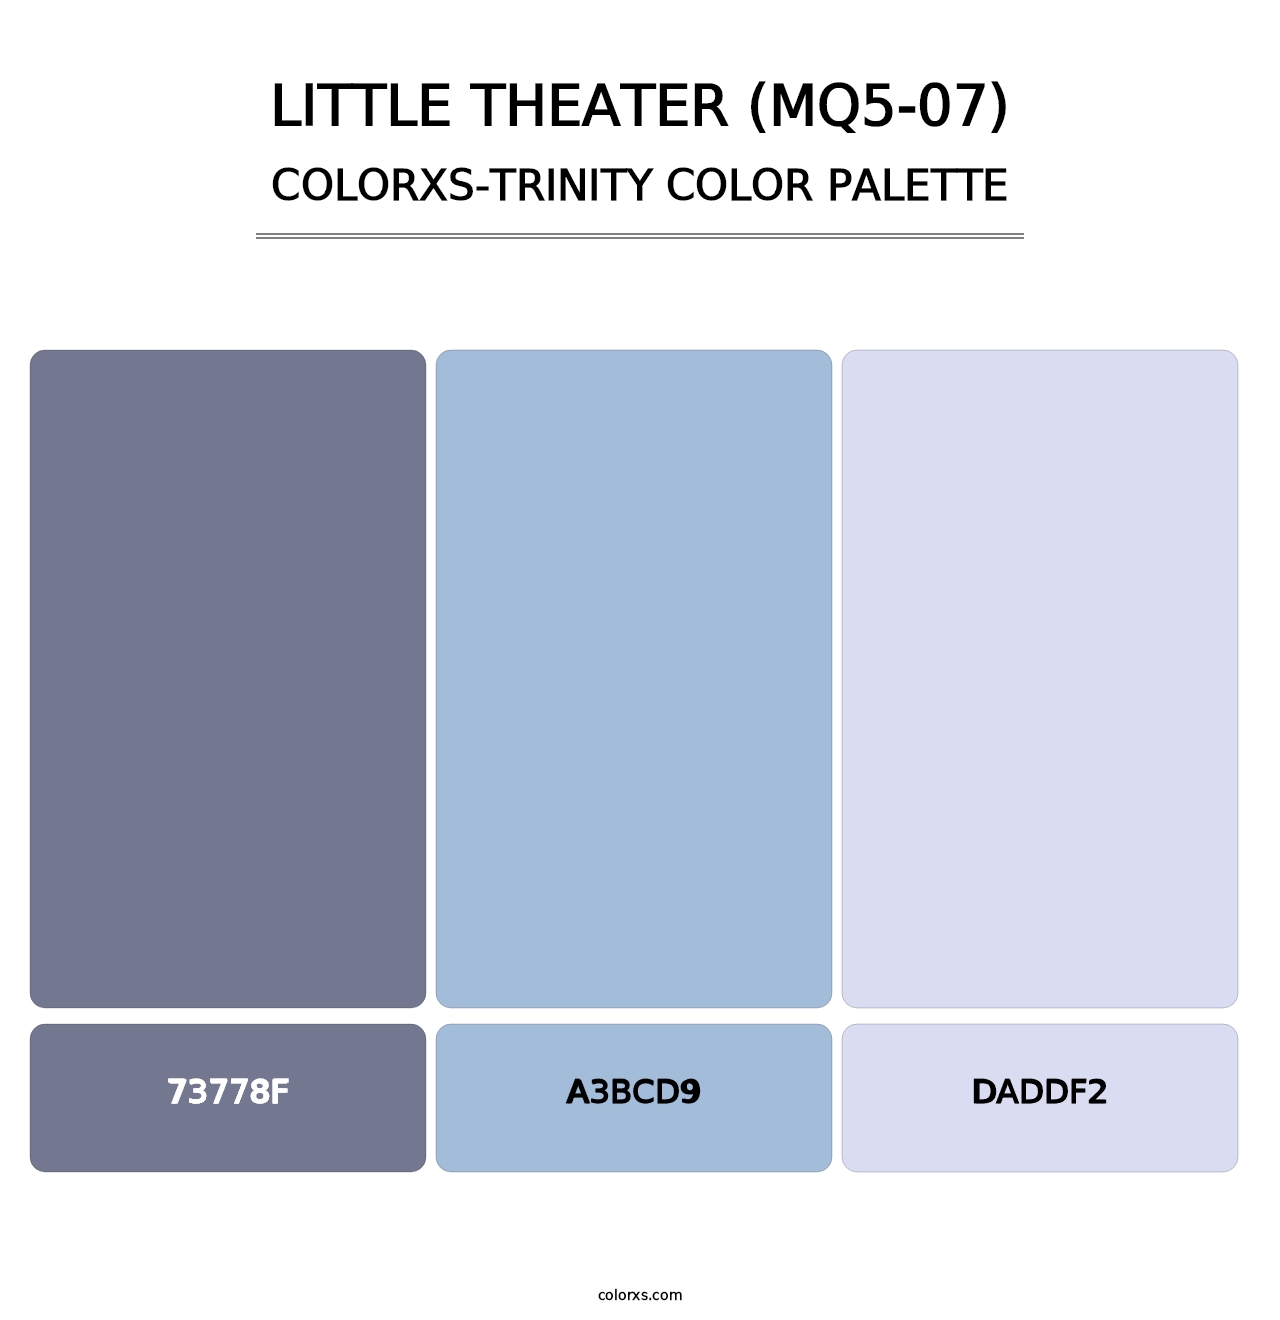 Little Theater (MQ5-07) - Colorxs Trinity Palette